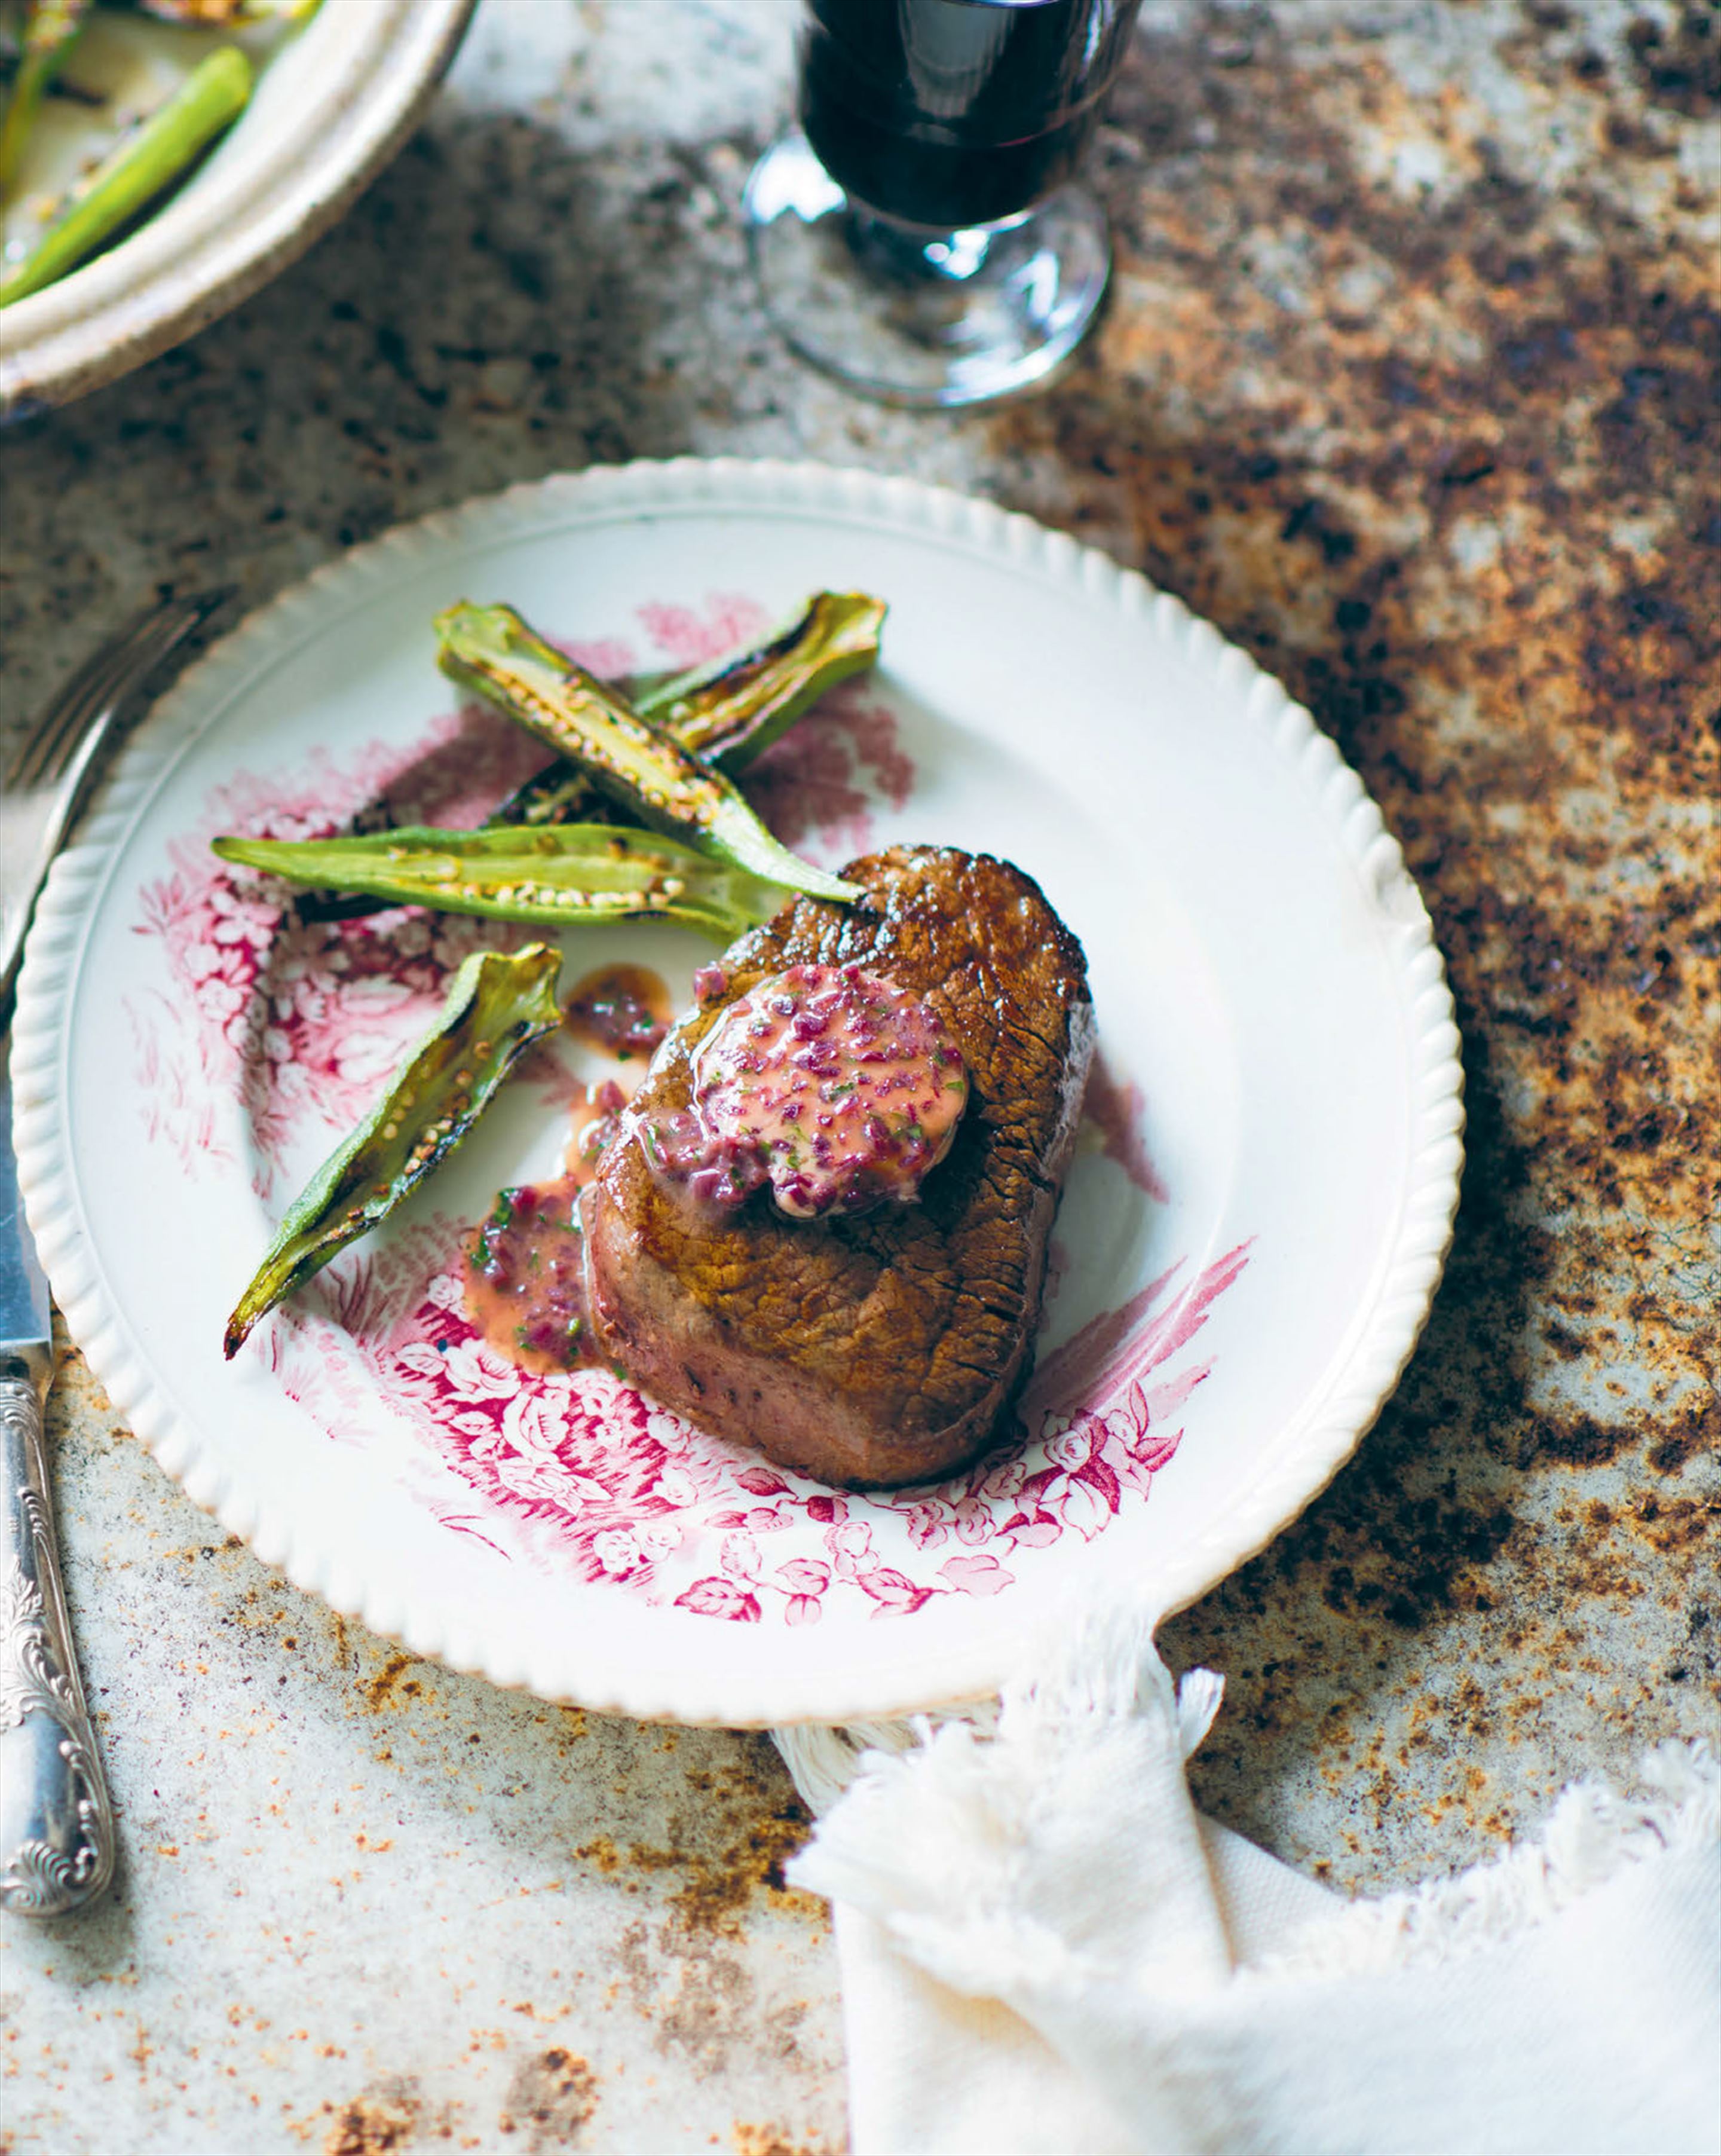 Scotch fillet with okra & red asian shallot butter